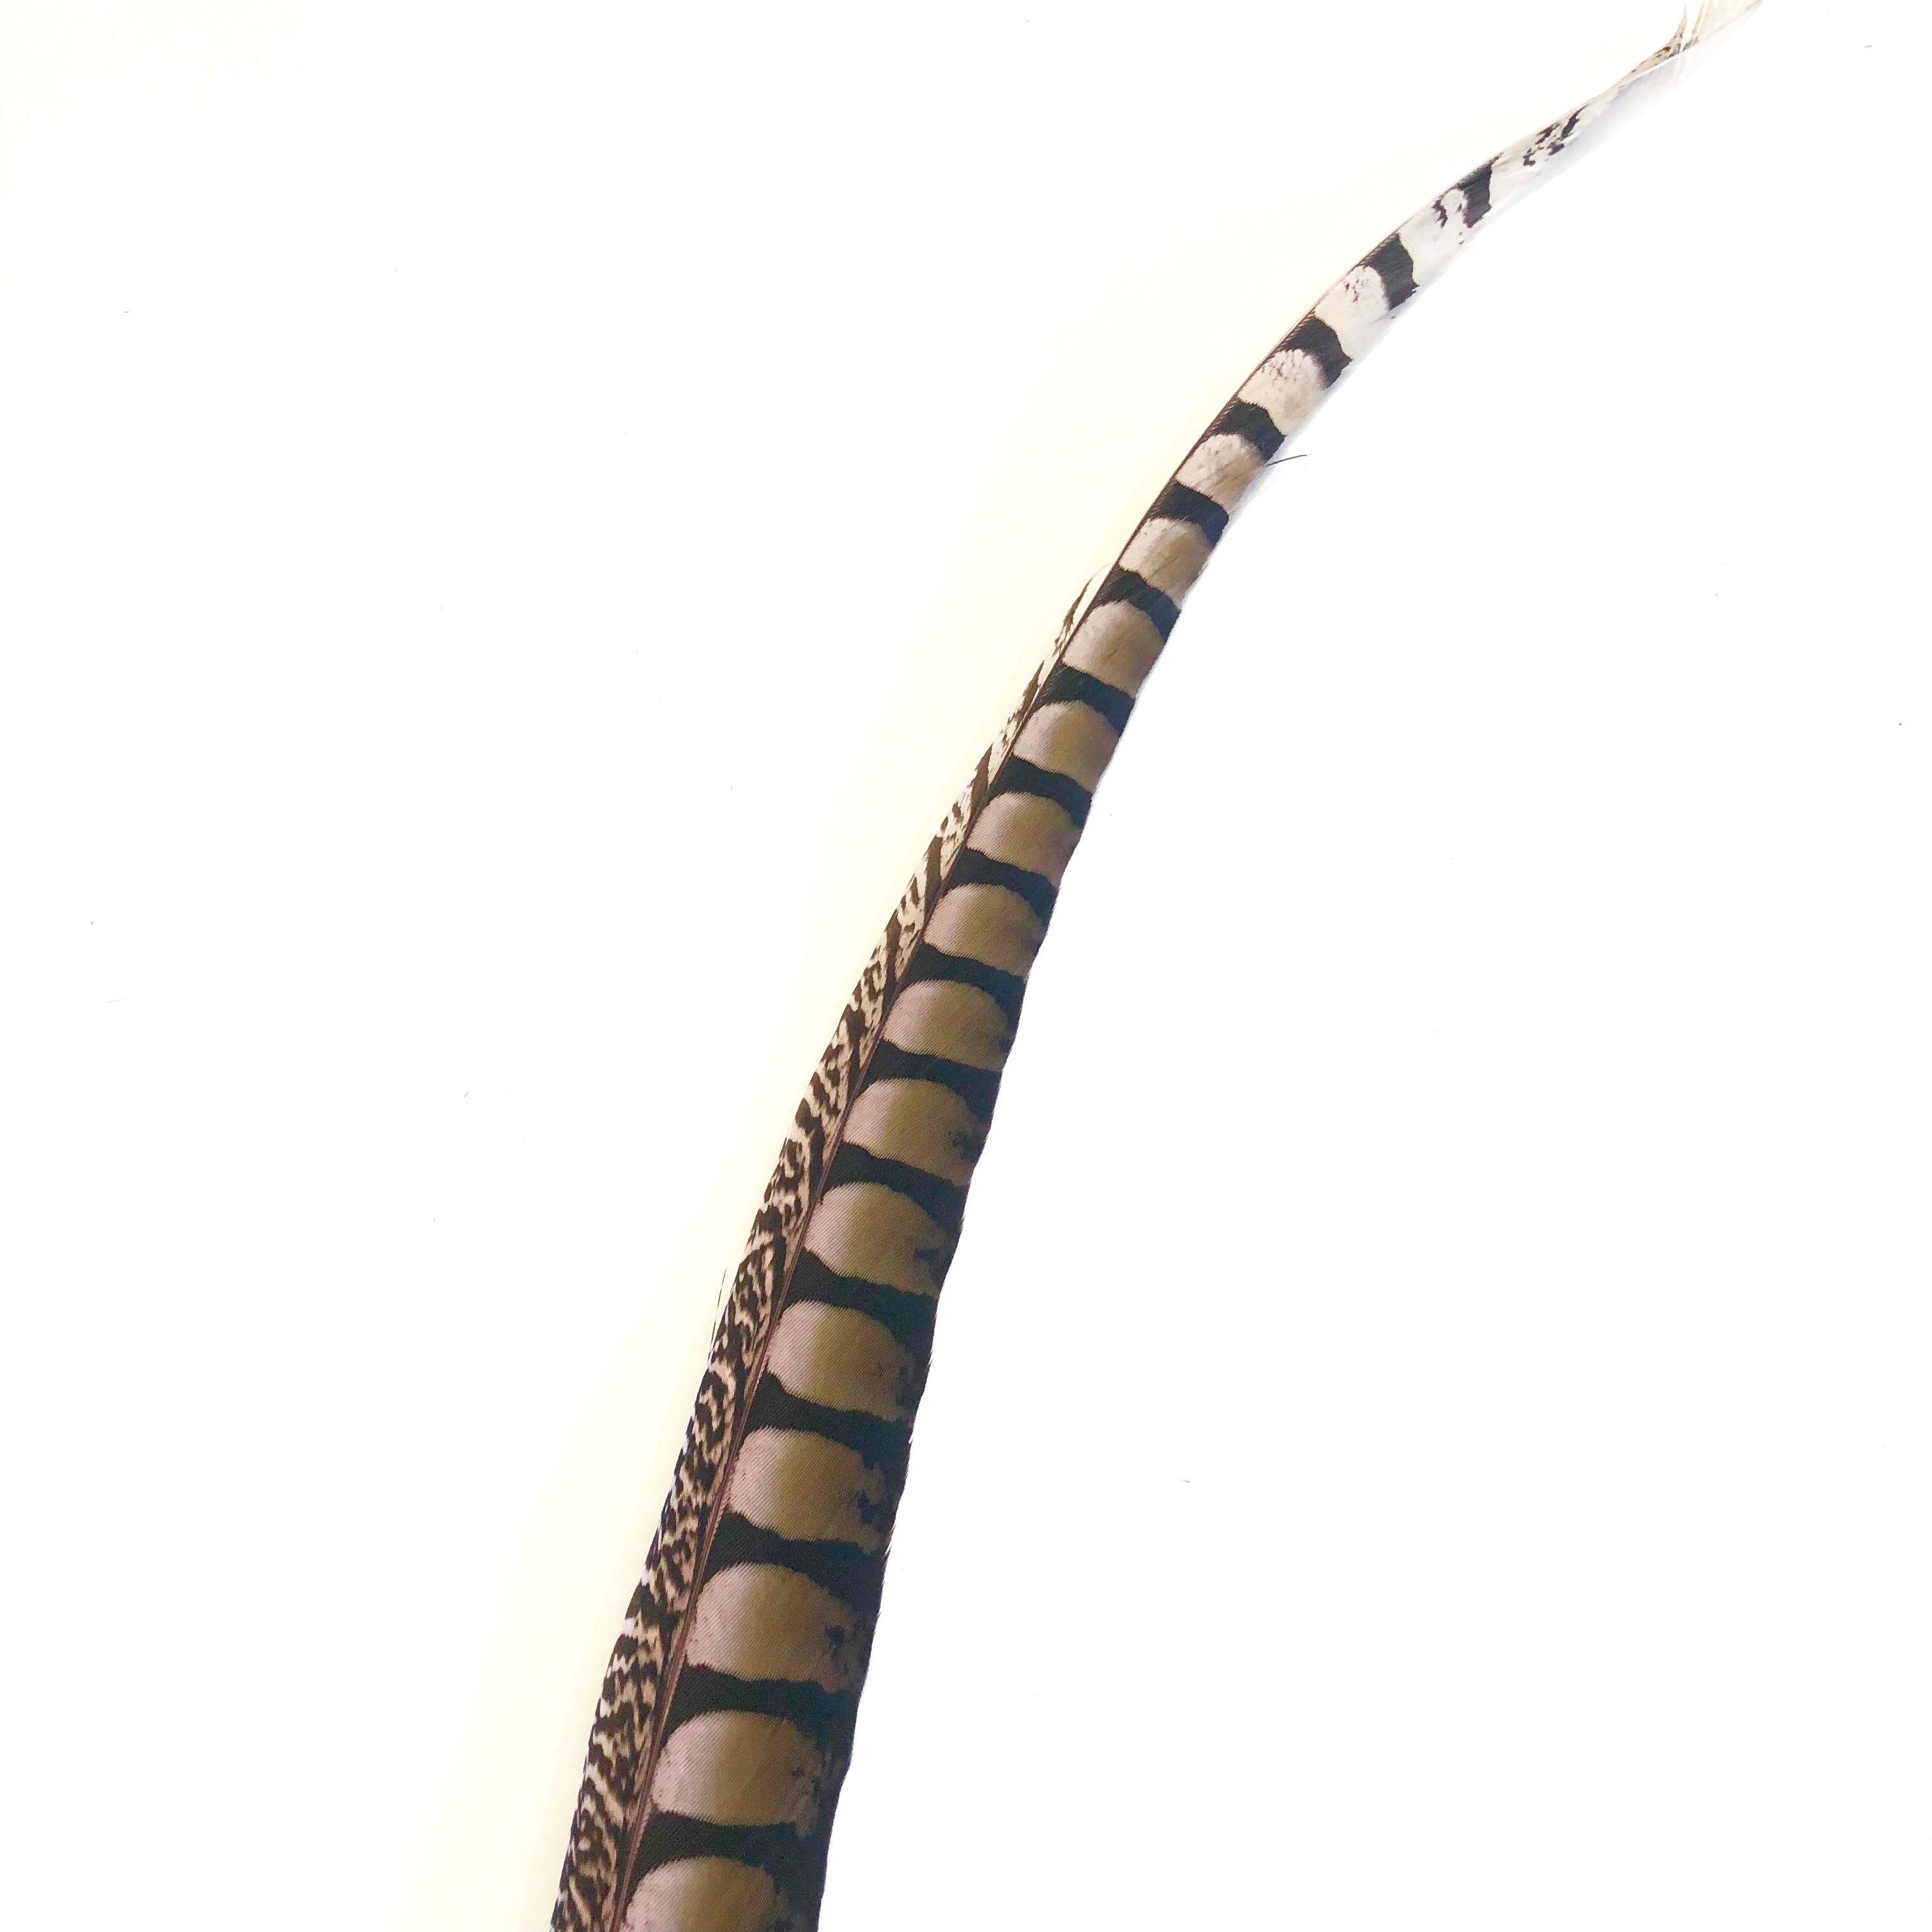 30" to 38" Lady Amherst Pheasant Side Tail Feather - Pink